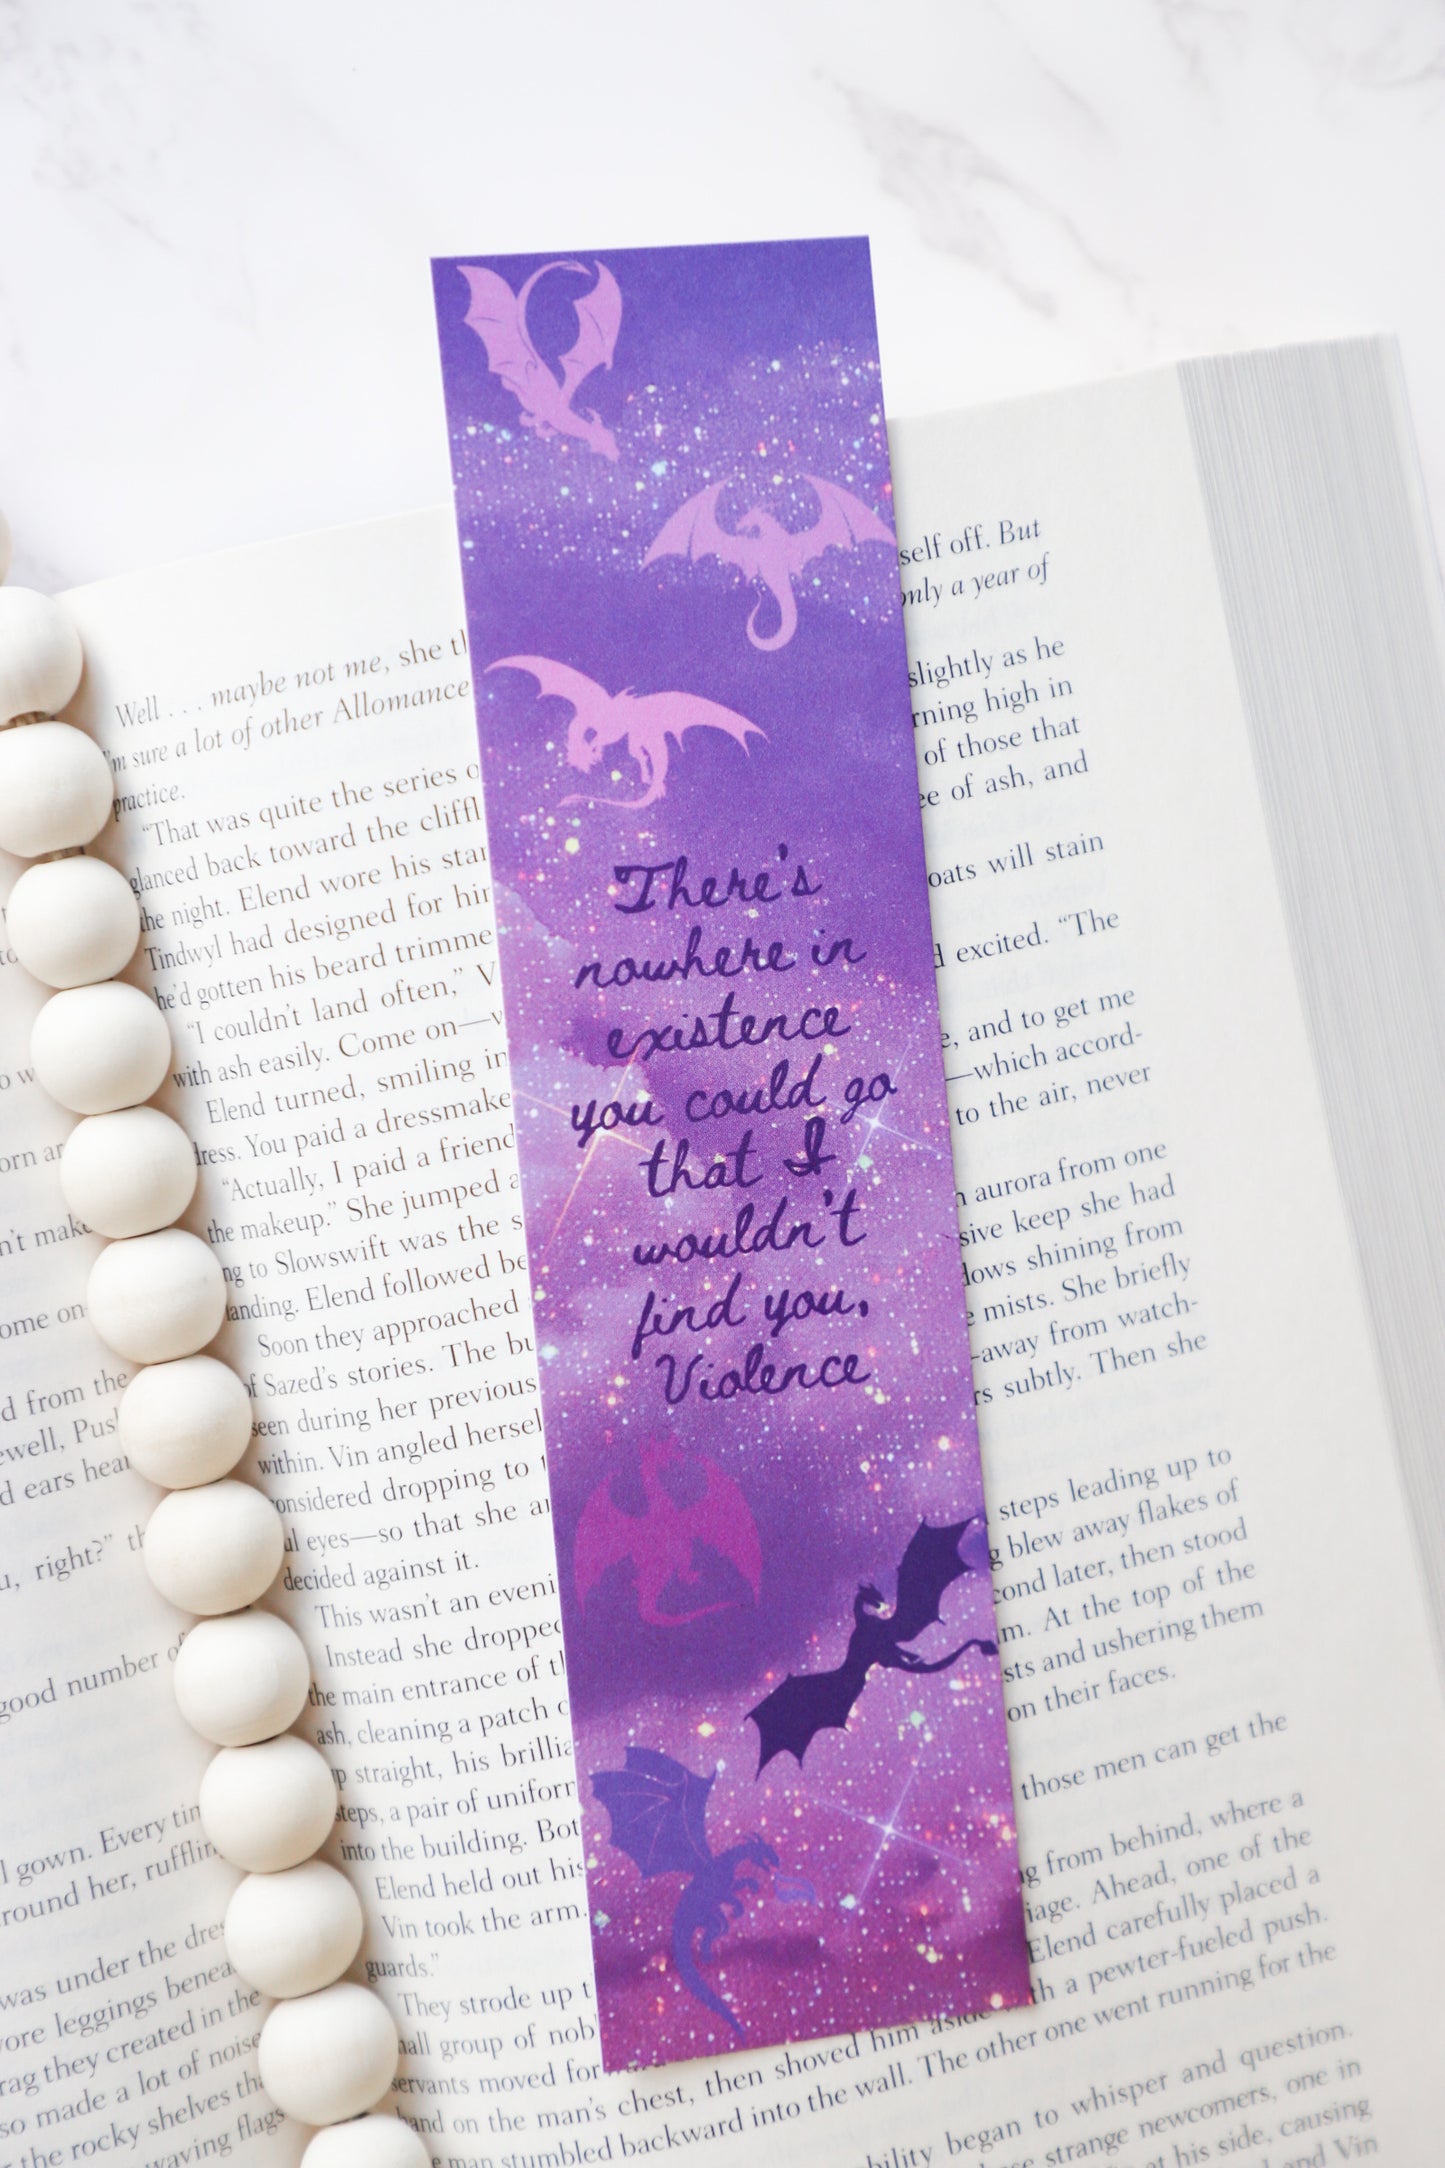 Fourth Wing Bookmark